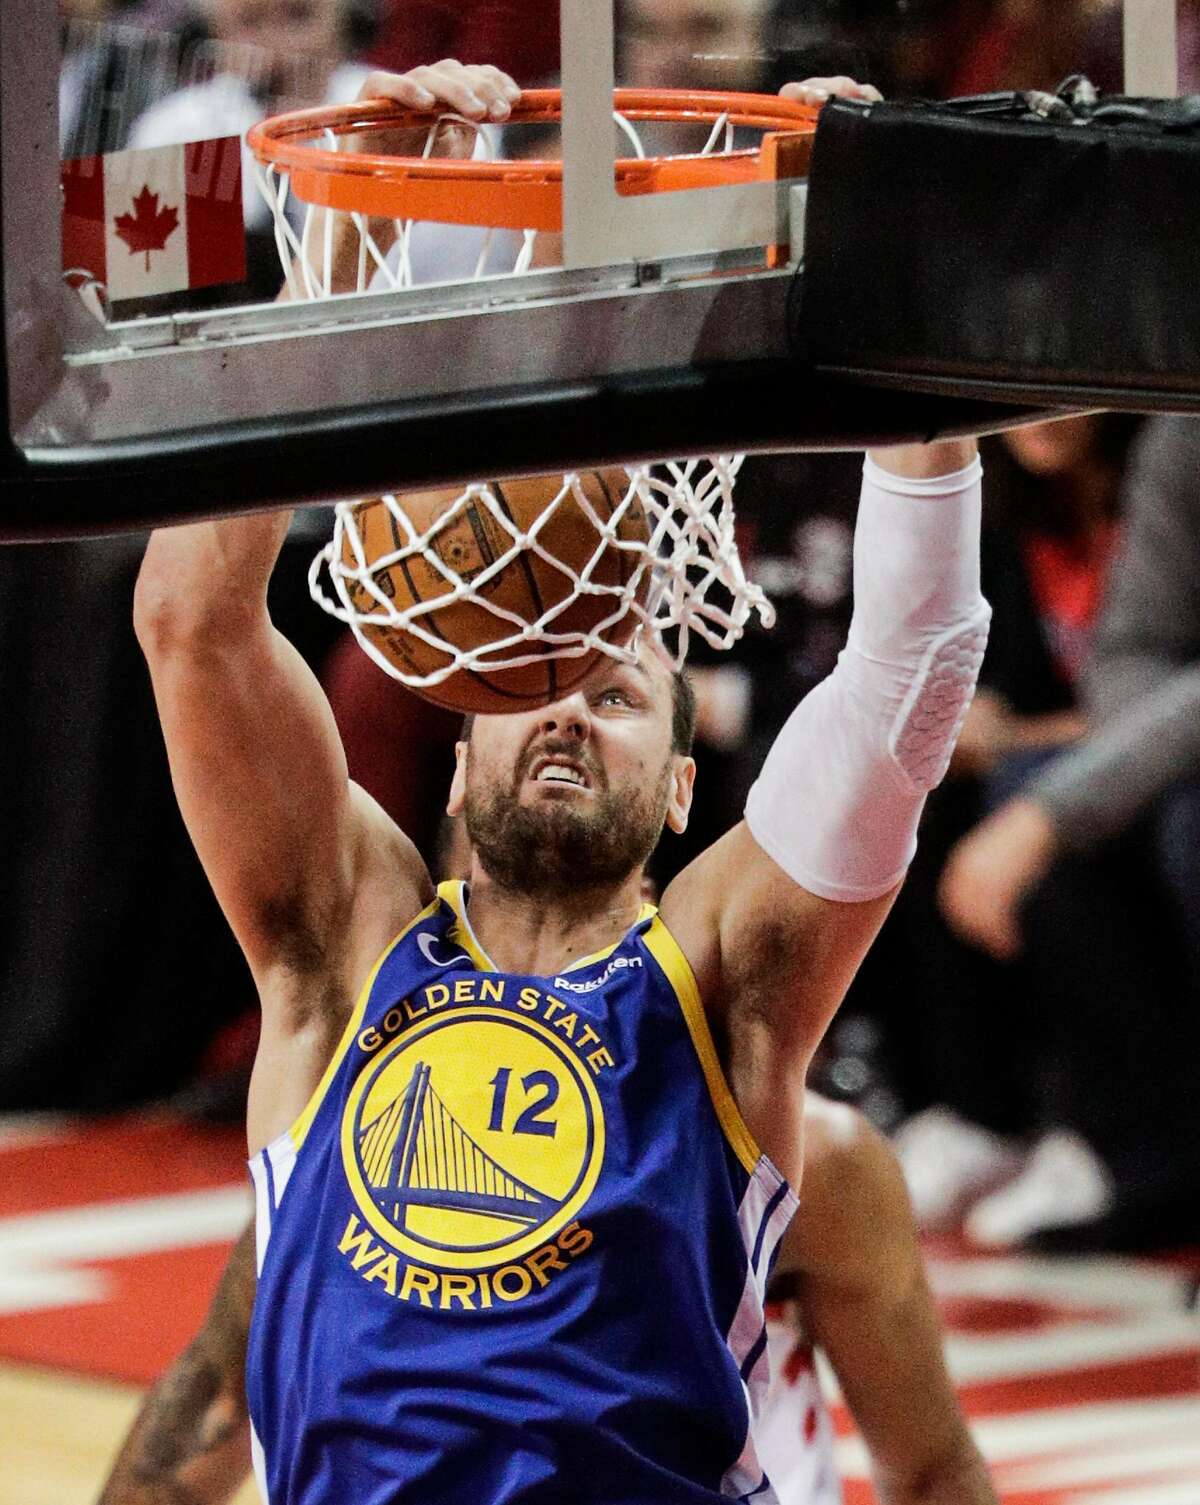 Golden State Warriors’ Andrew Bogut dunks in the third quarter during game 2 of the NBA Finals between the Golden State Warriors and the Toronto Raptors at Scotiabank Arena on Sunday, June 2, 2019 in Toronto, Ontario, Canada.